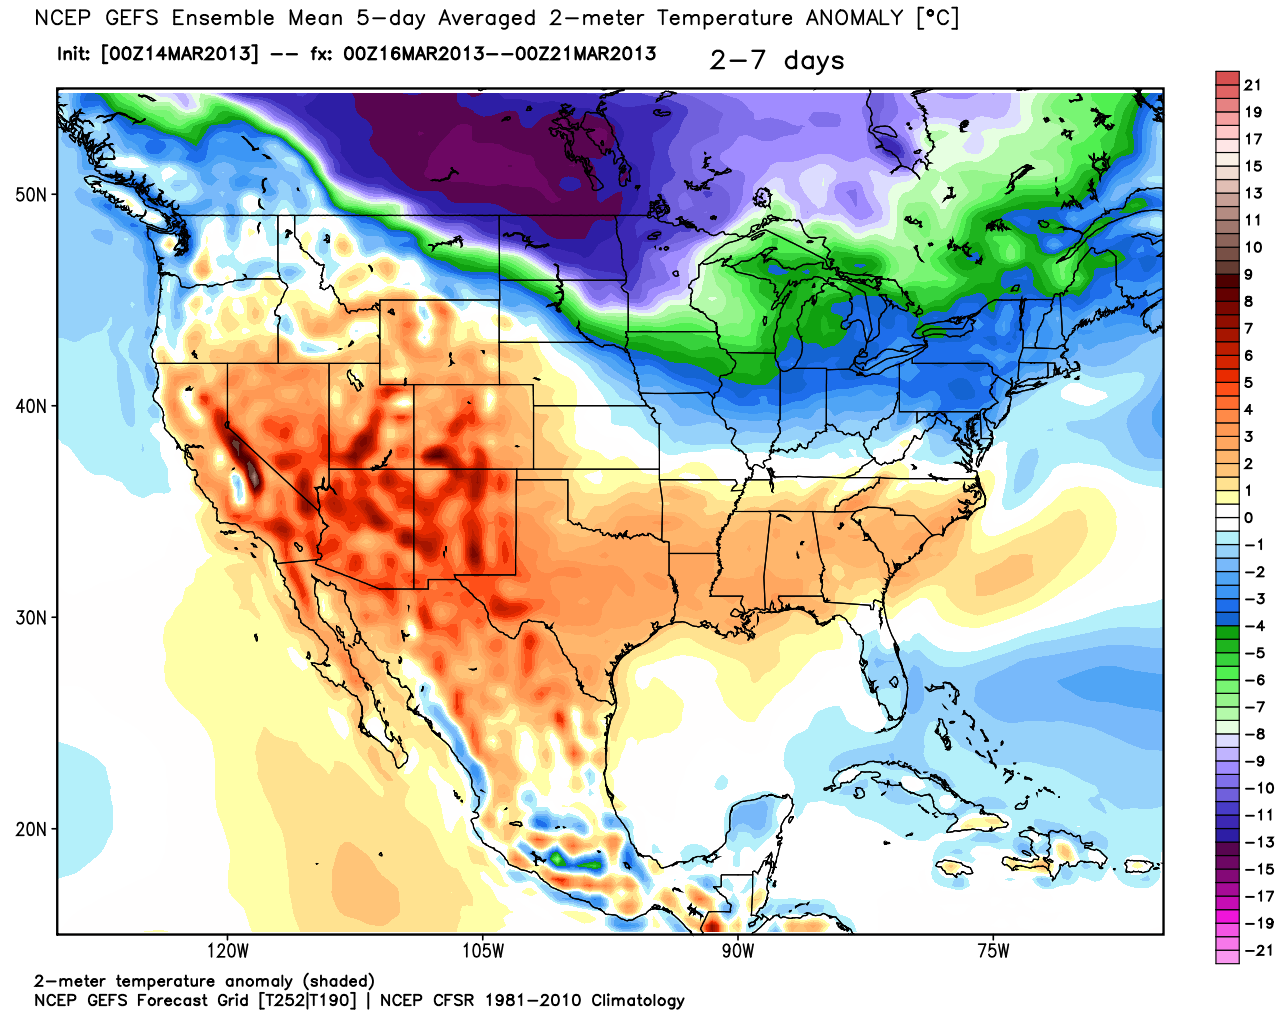 Colder than normal weather likely for northern U.S., including New England, in the next week - weatherbell.com